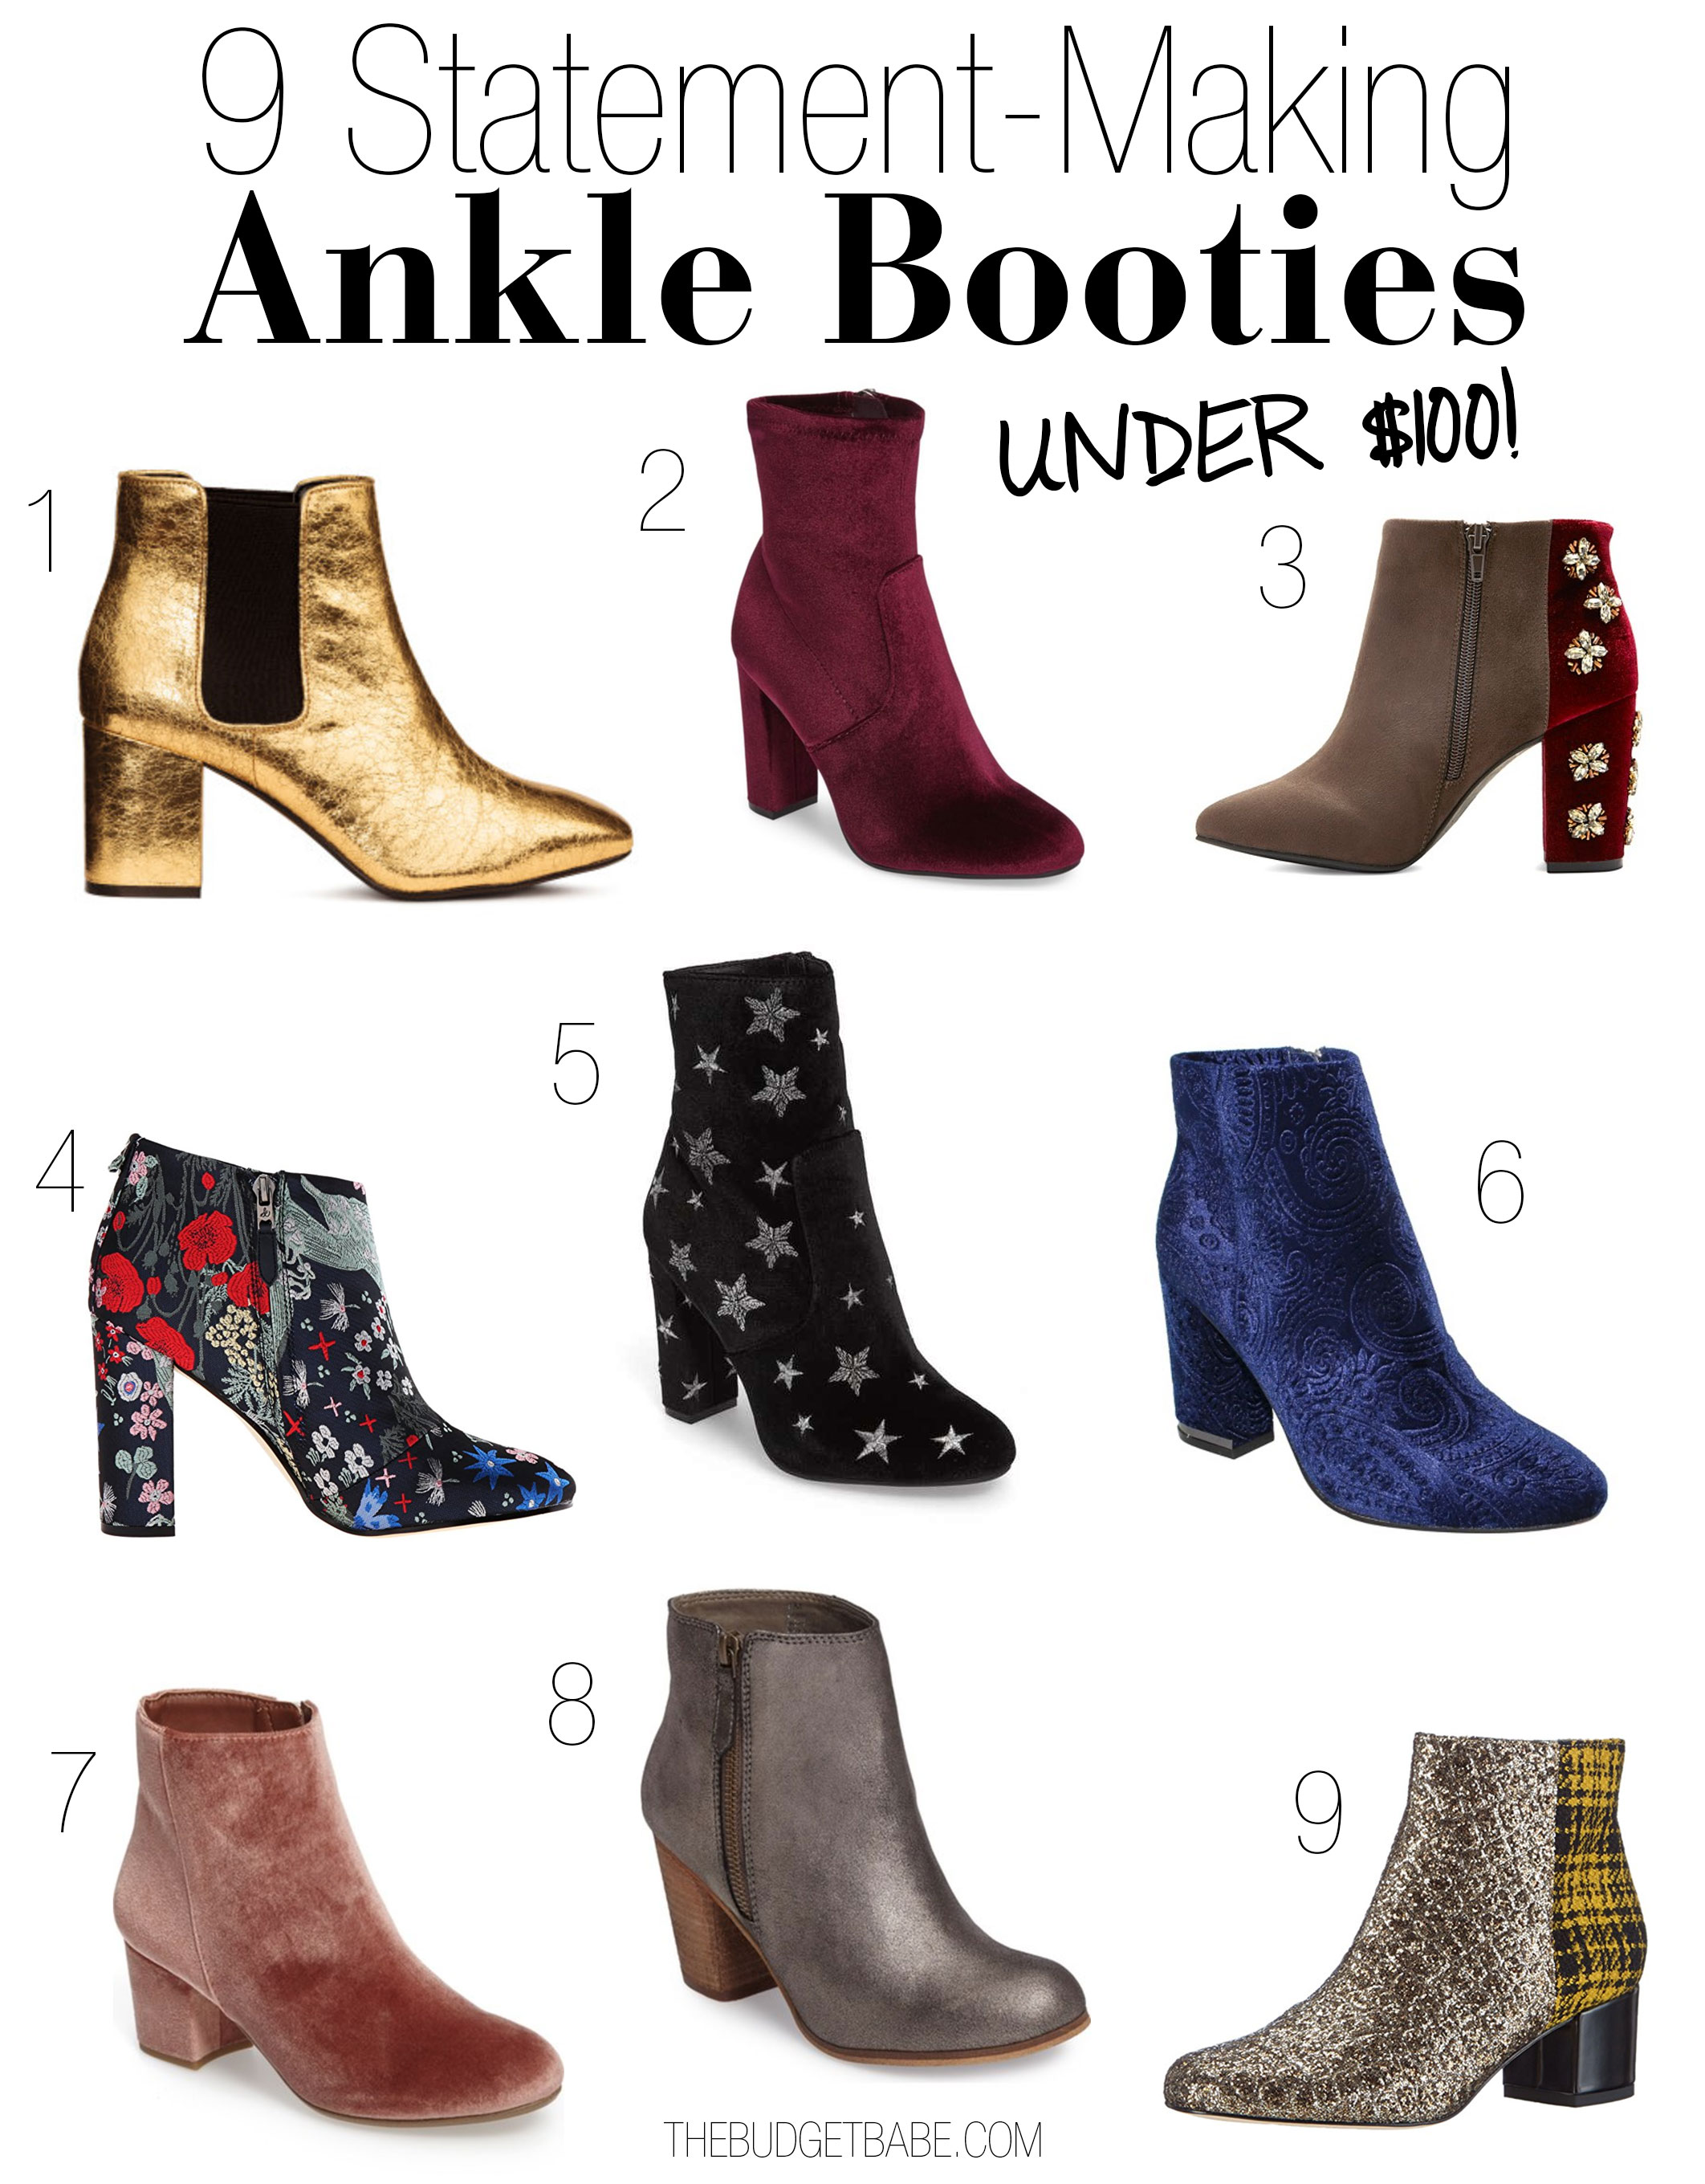 Shop 9 statement-making ankle booties under $100 to elevate your holiday party look.